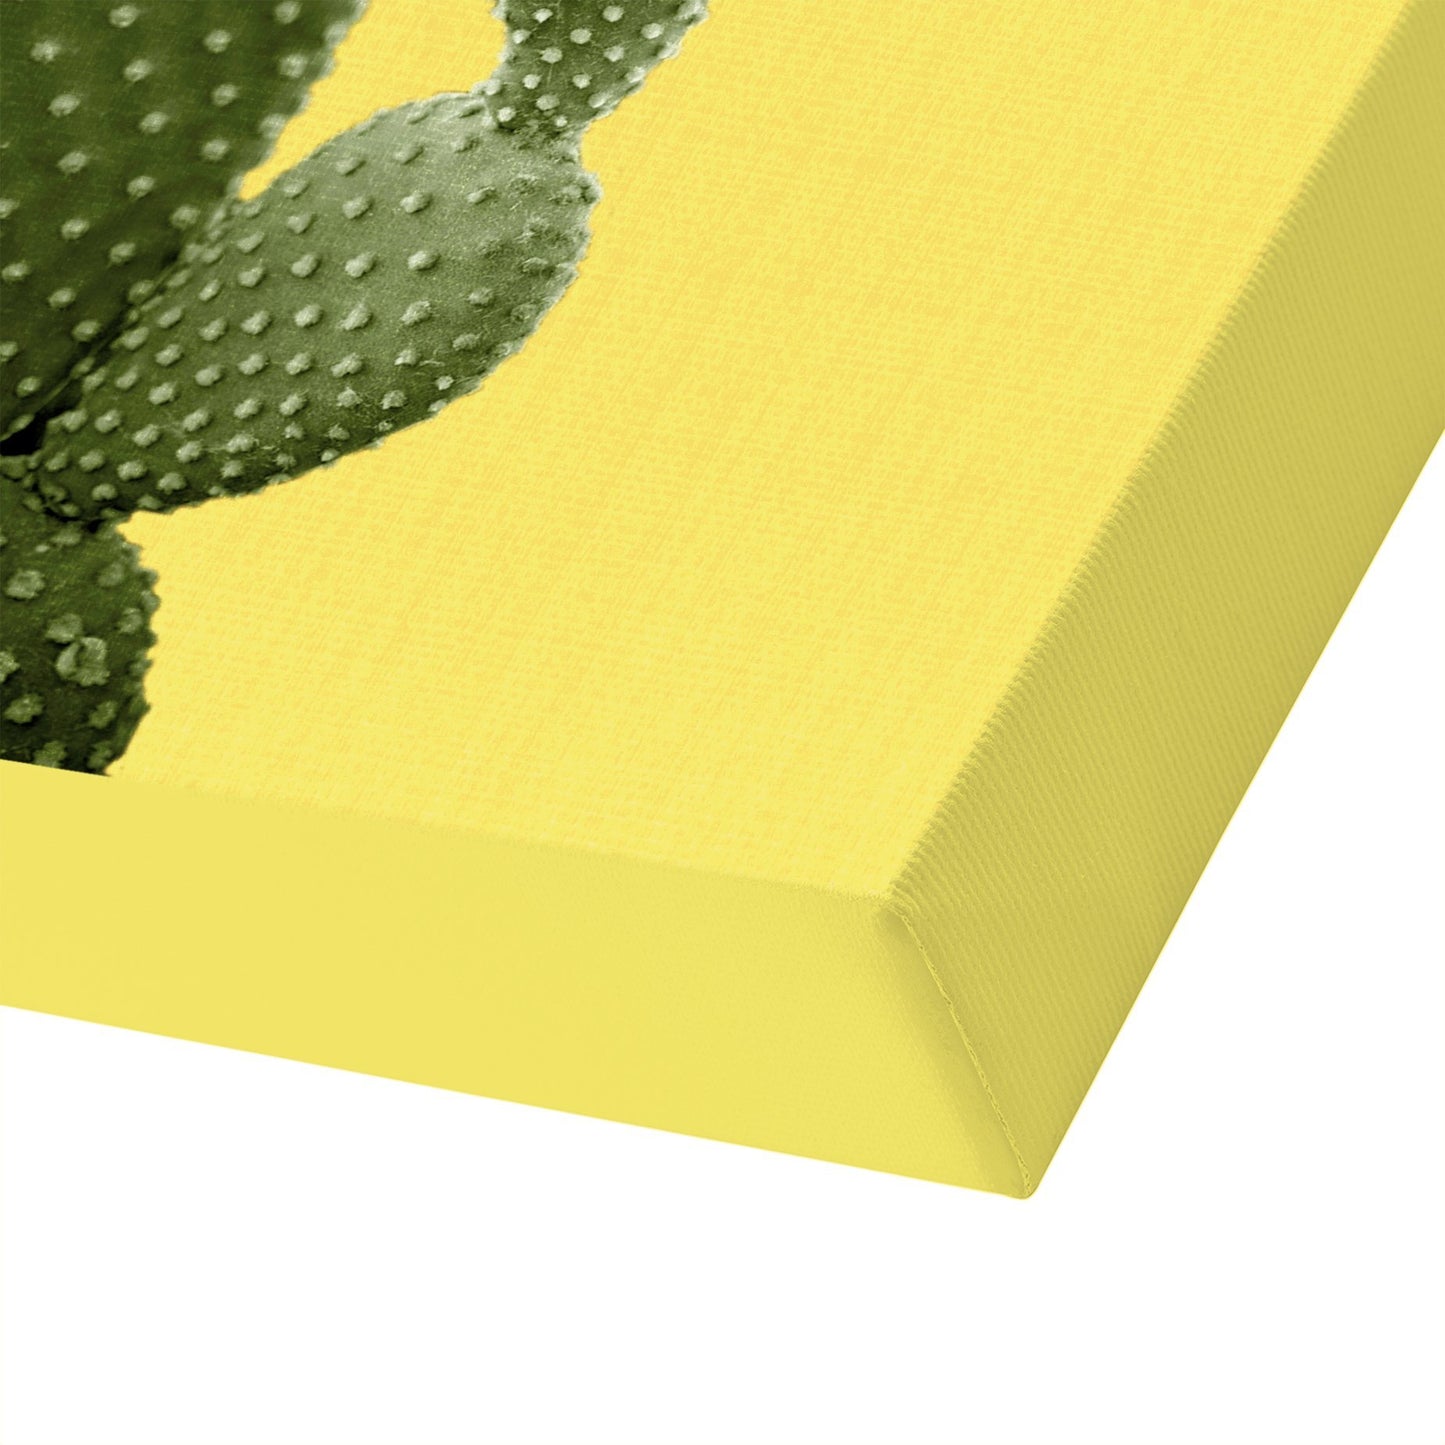 Cactus On Yellow by Lila + Lola Wrapped Canvas - Wrapped Canvas - Americanflat